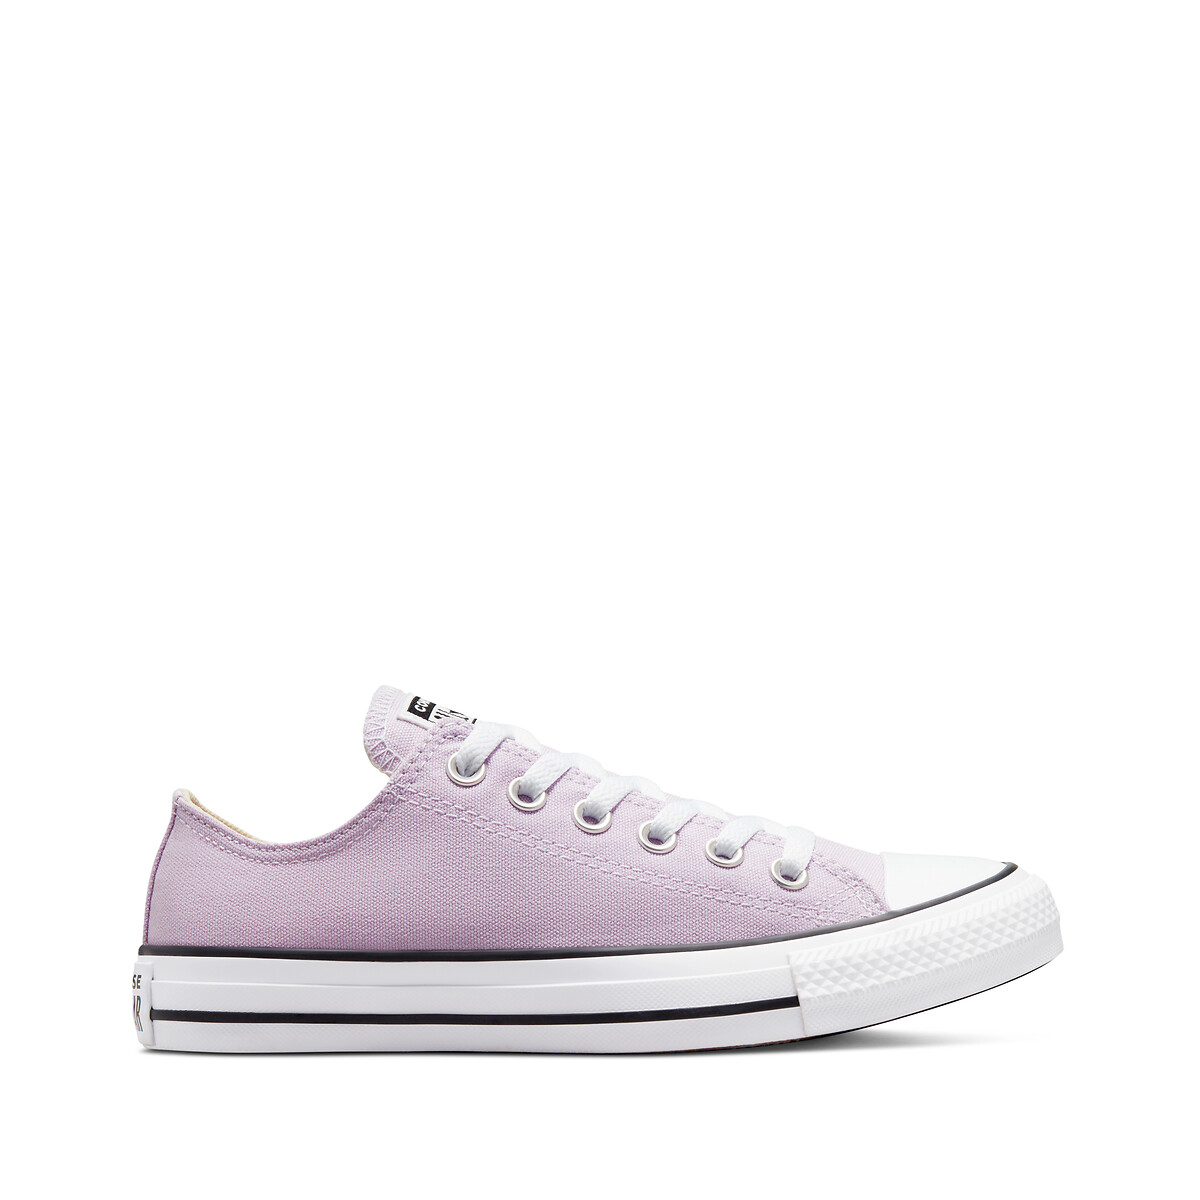 Converse Canvas Trainers in Lilac Purple Womens Shoes Trainers Low-top trainers 